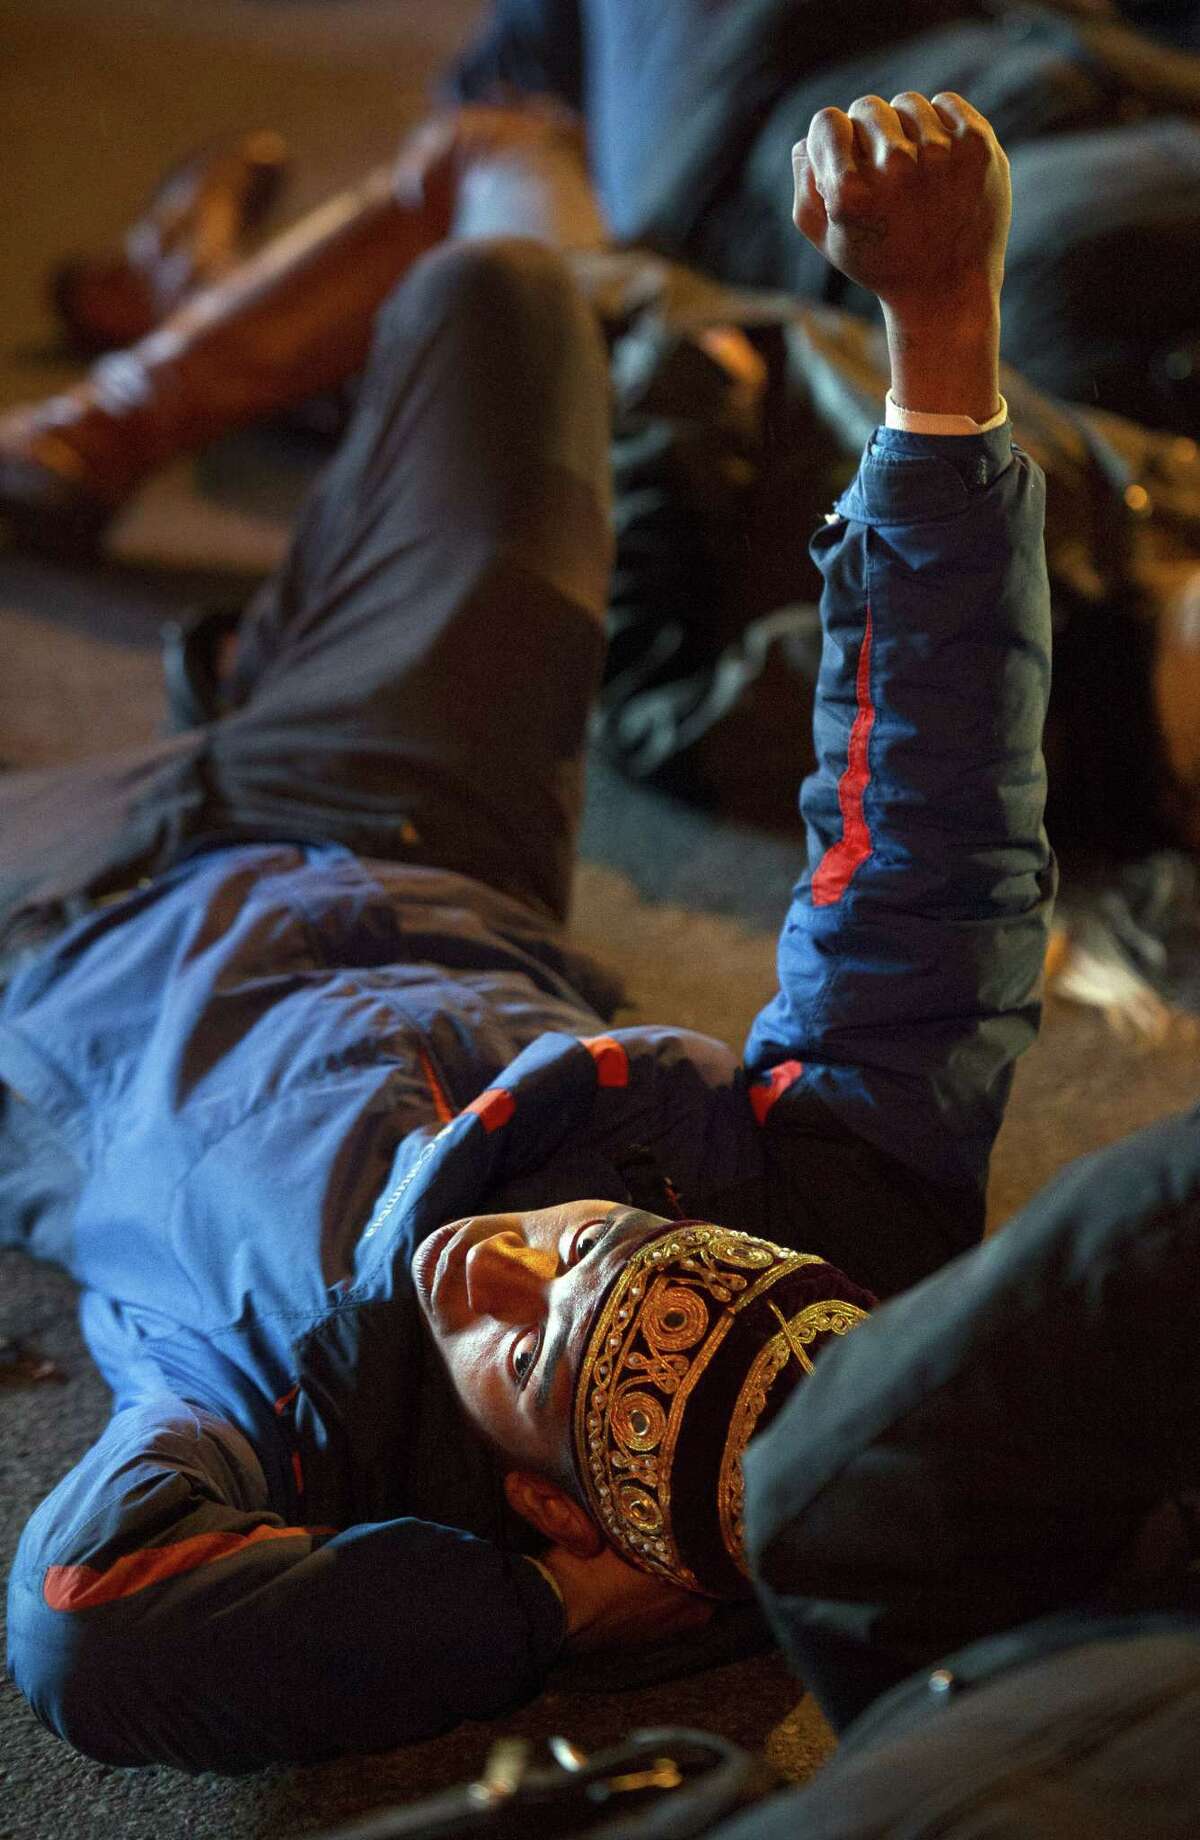 Deon Johnson, 19, of Washington, DC, raises his fist as he and others take part in a four and-a-half minute "die-in" while blocking an intersection in downtown,Washington, Friday, Dec. 5, 2014, during a demonstration against the deaths of two unarmed black men at the hands of white police officers in New York City and Ferguson, Mo. (AP Photo/Cliff Owen)